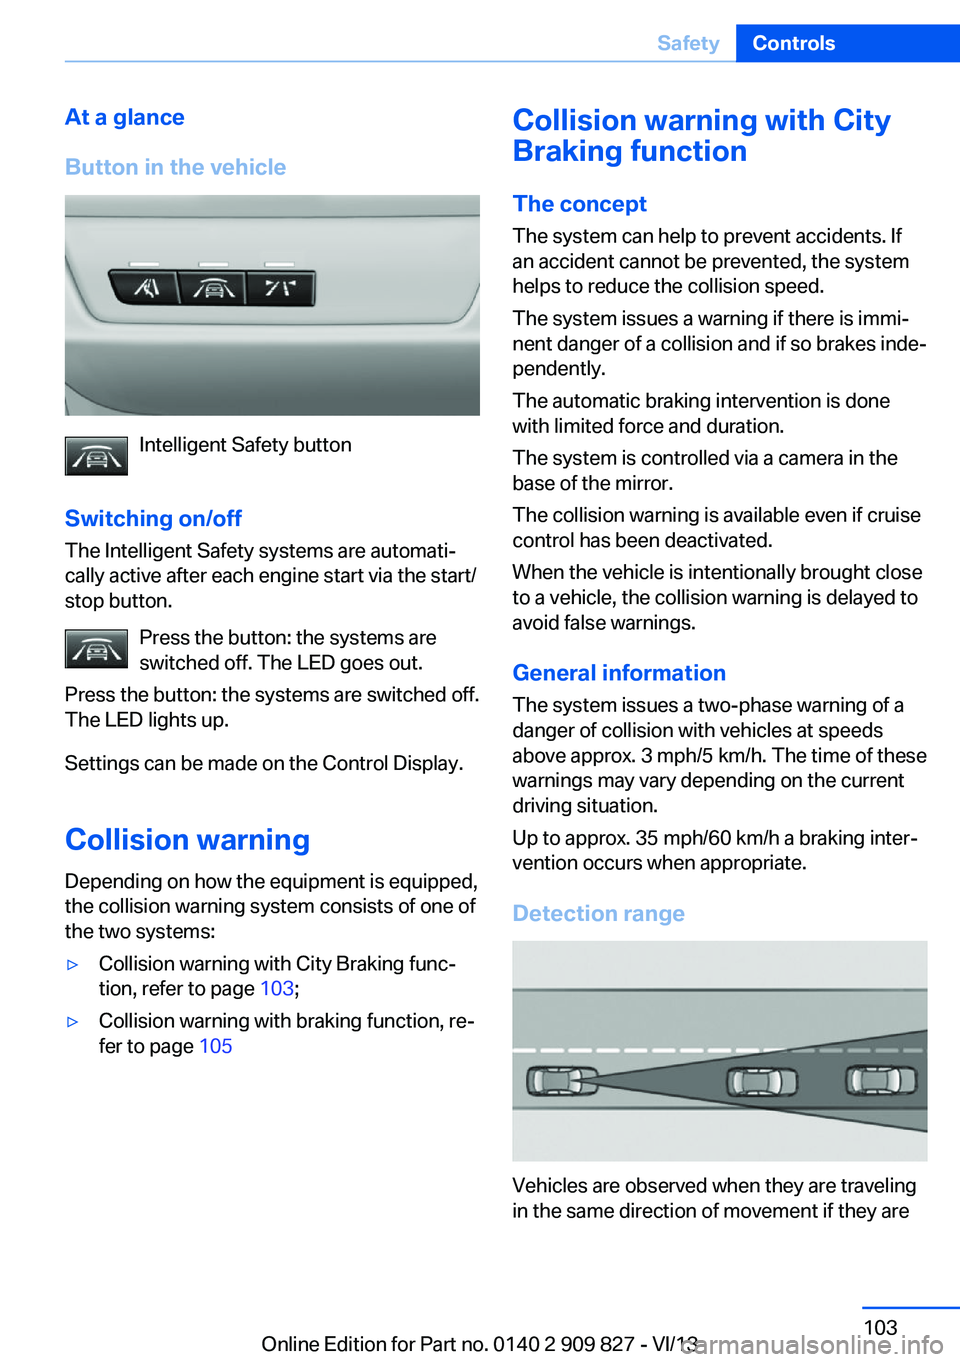 BMW 428I COUPE 2014  Owners Manual At a glance
Button in the vehicle
Intelligent Safety button
Switching on/off The Intelligent Safety systems are automati‐
cally active after each engine start via the start/
stop button.
Press the b